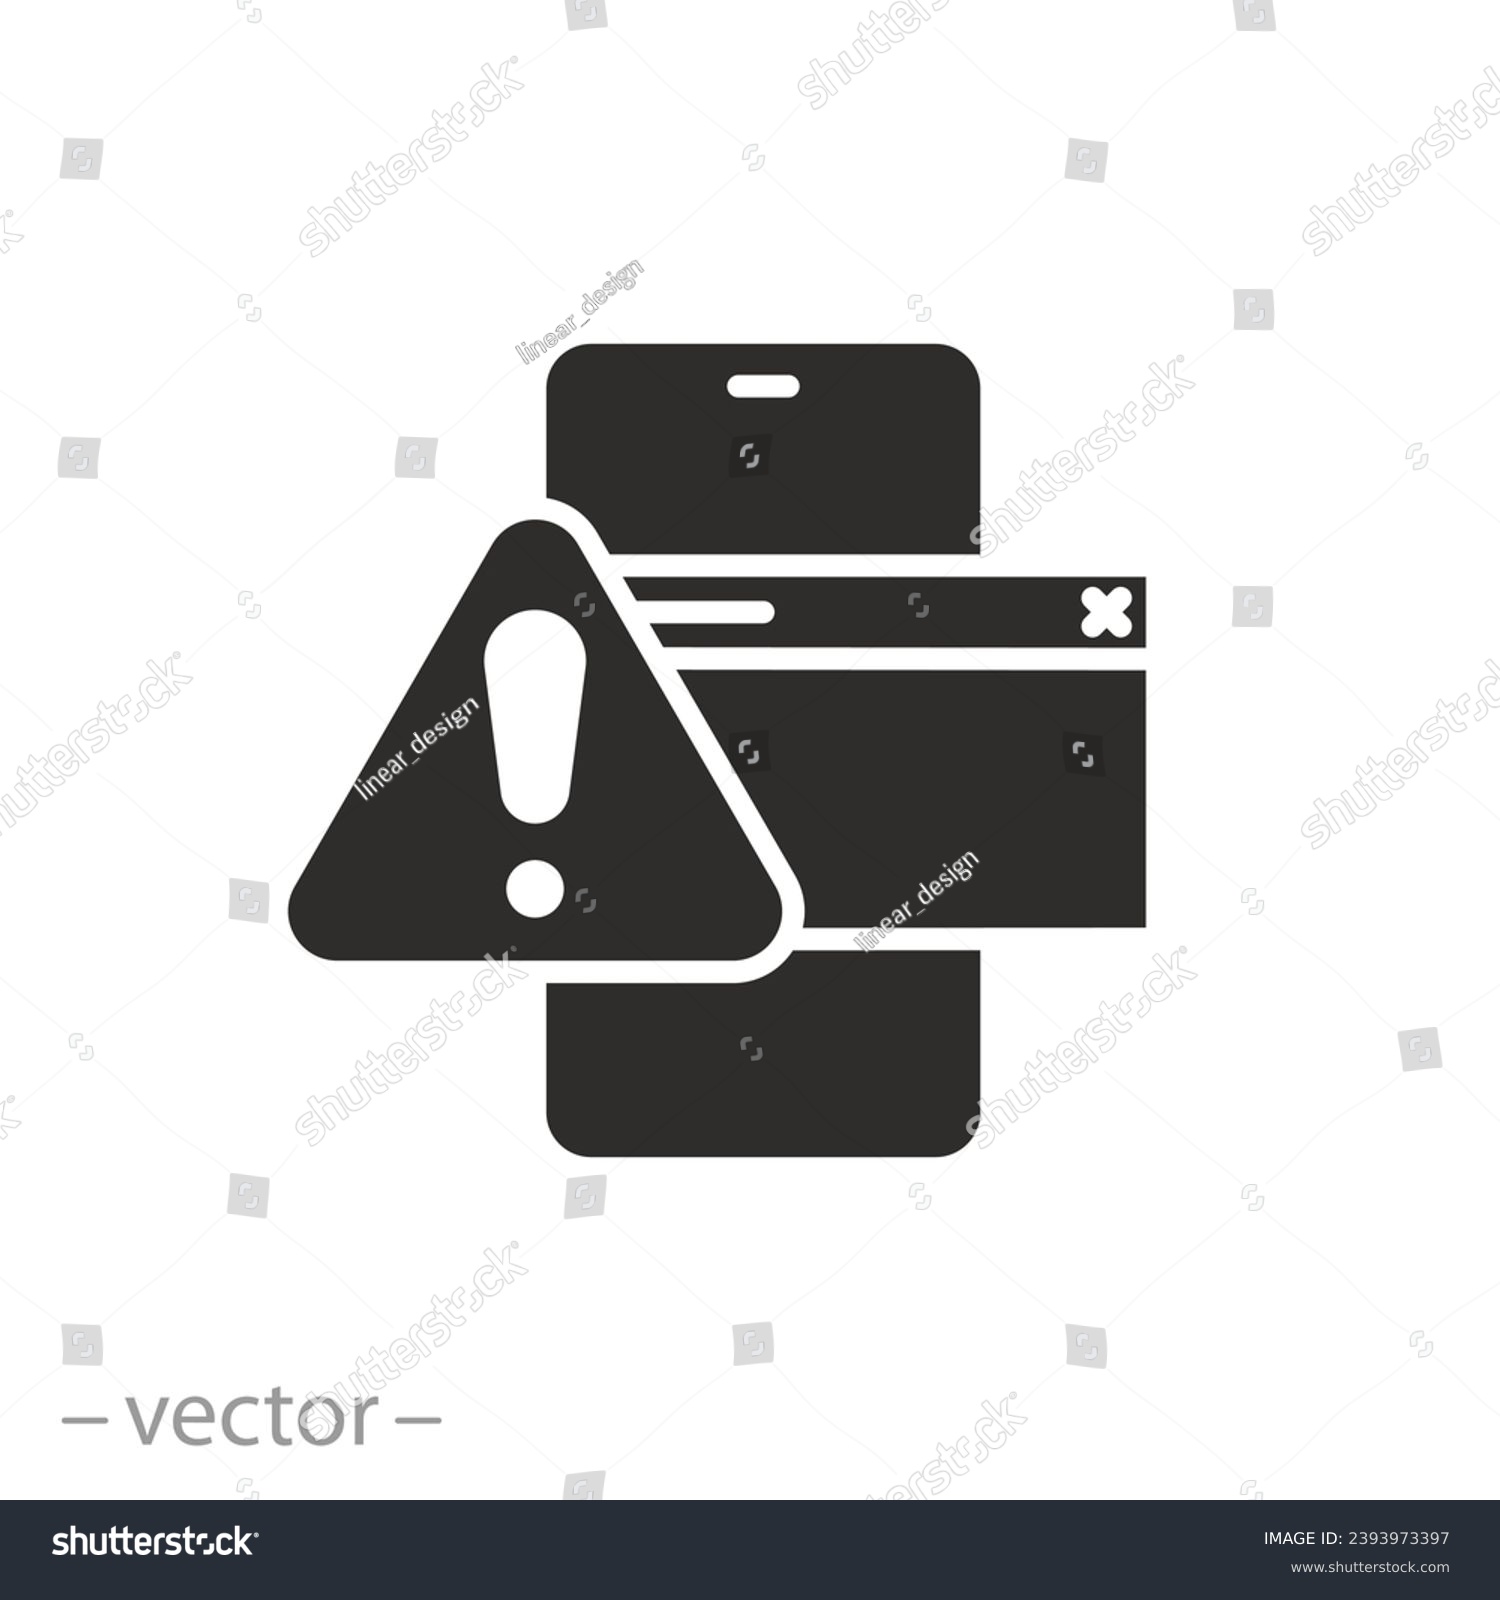 SVG of obscene site page warning icon, uncensored content, inappropriate censored content, flat symbol - editable stroke vector illustration svg